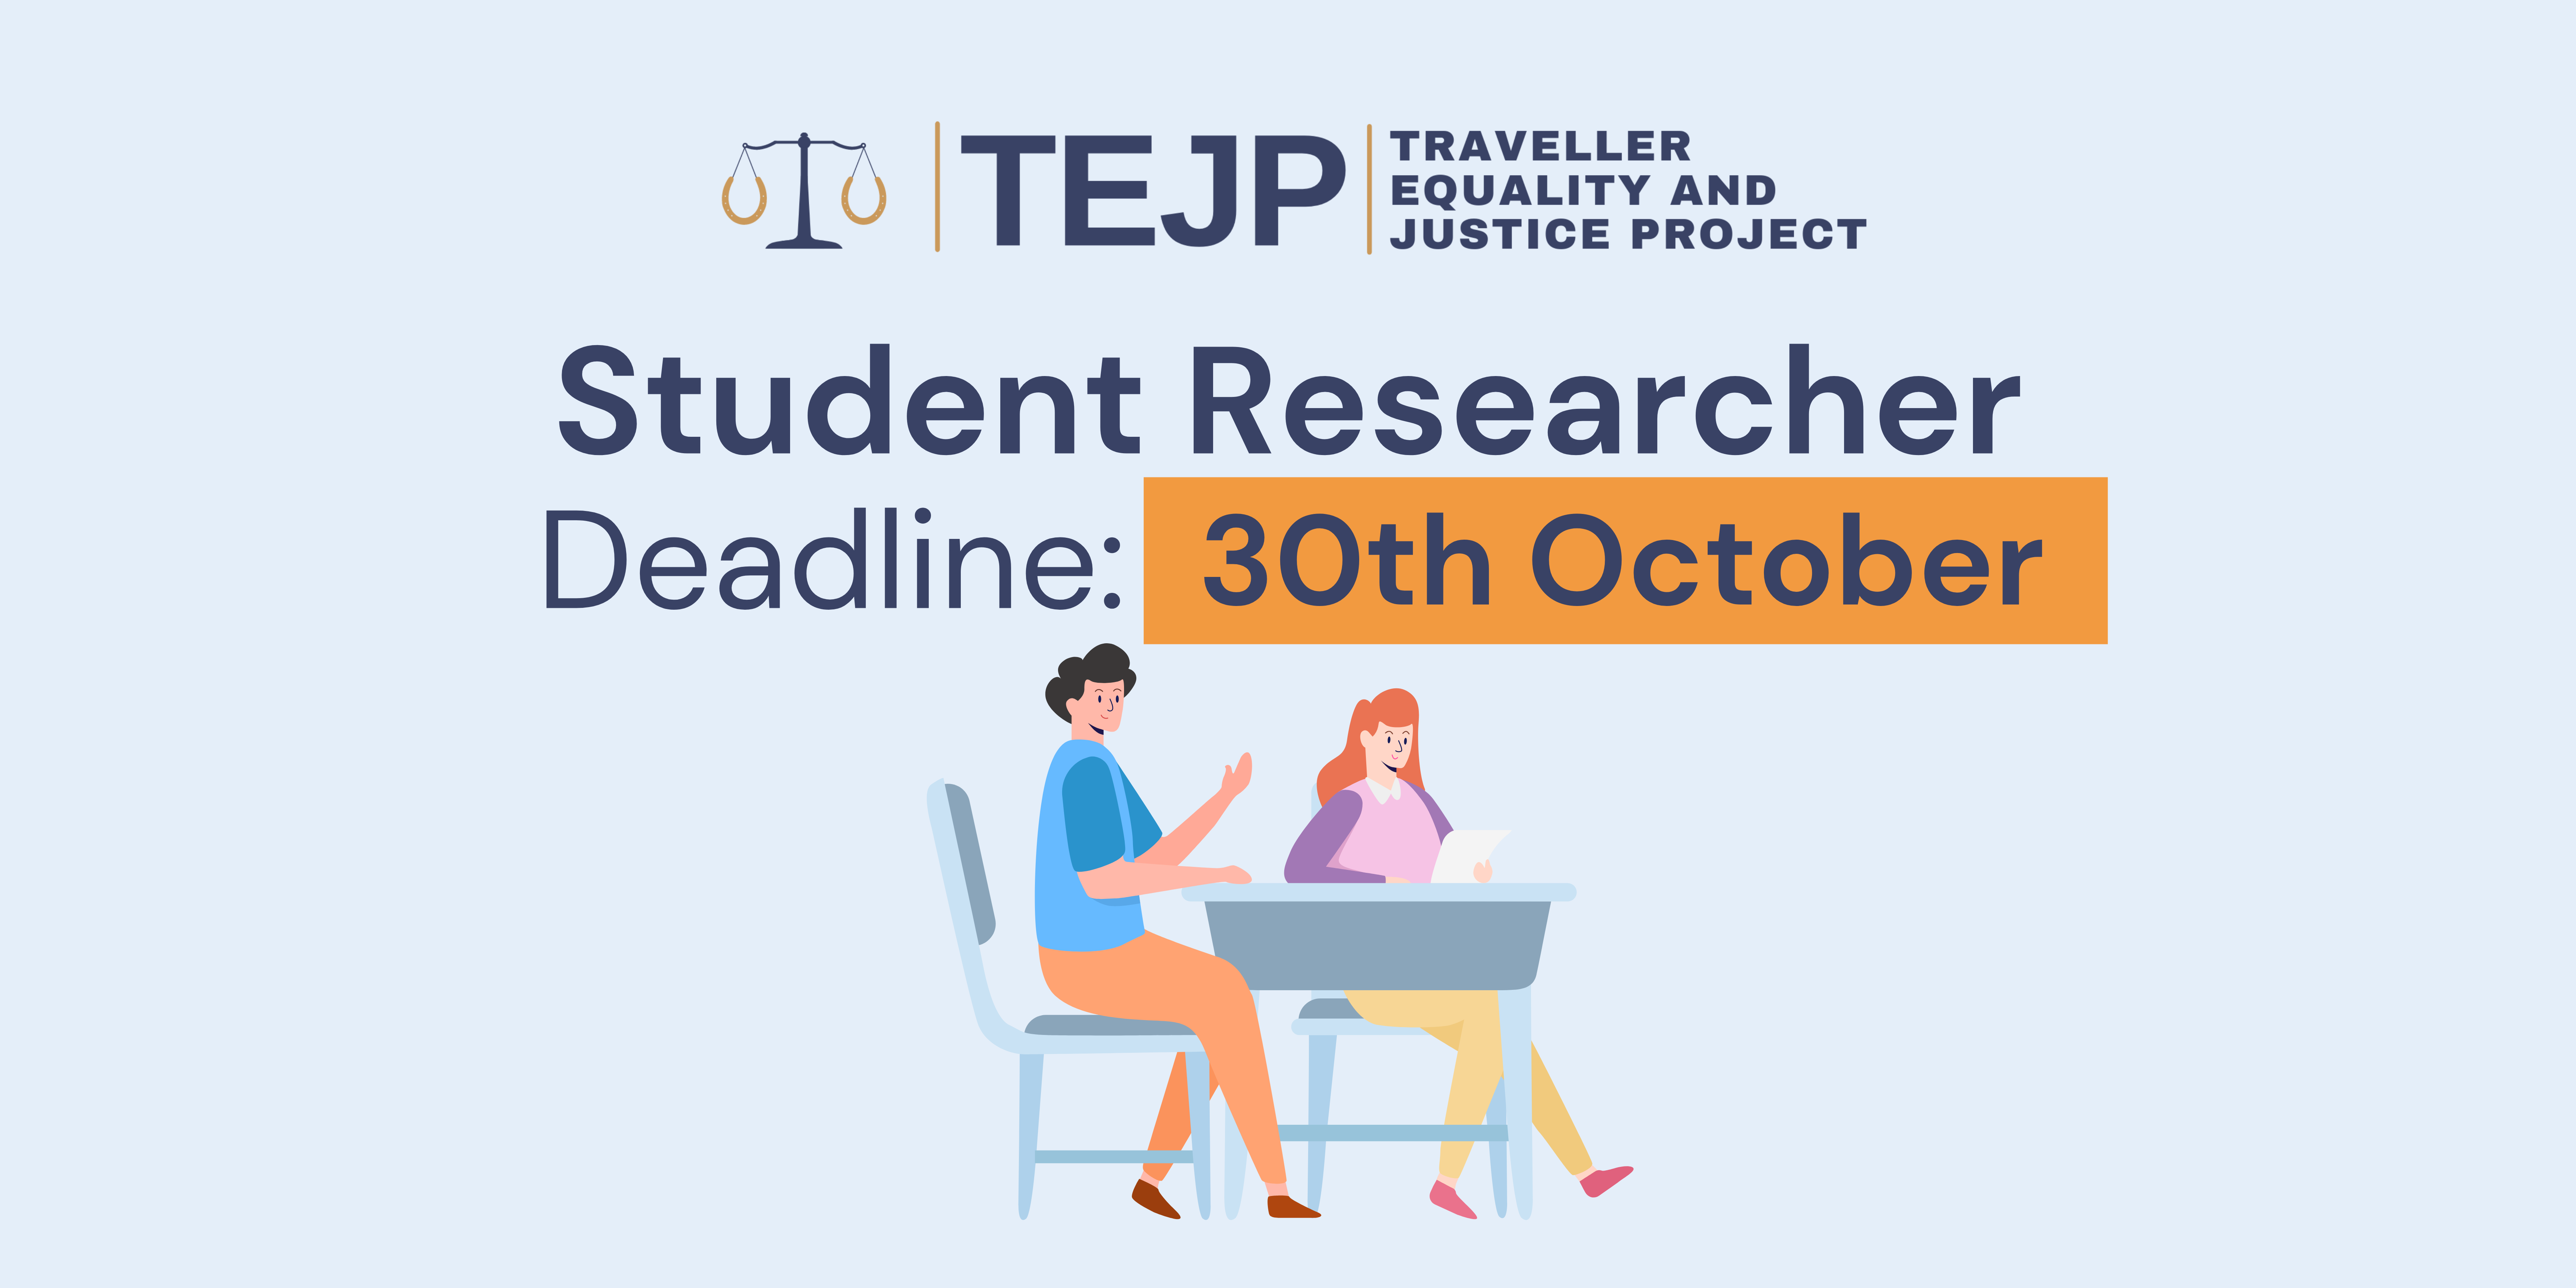 Student Researchers wanted for Traveller Equality and Justice Project Legal Clinic